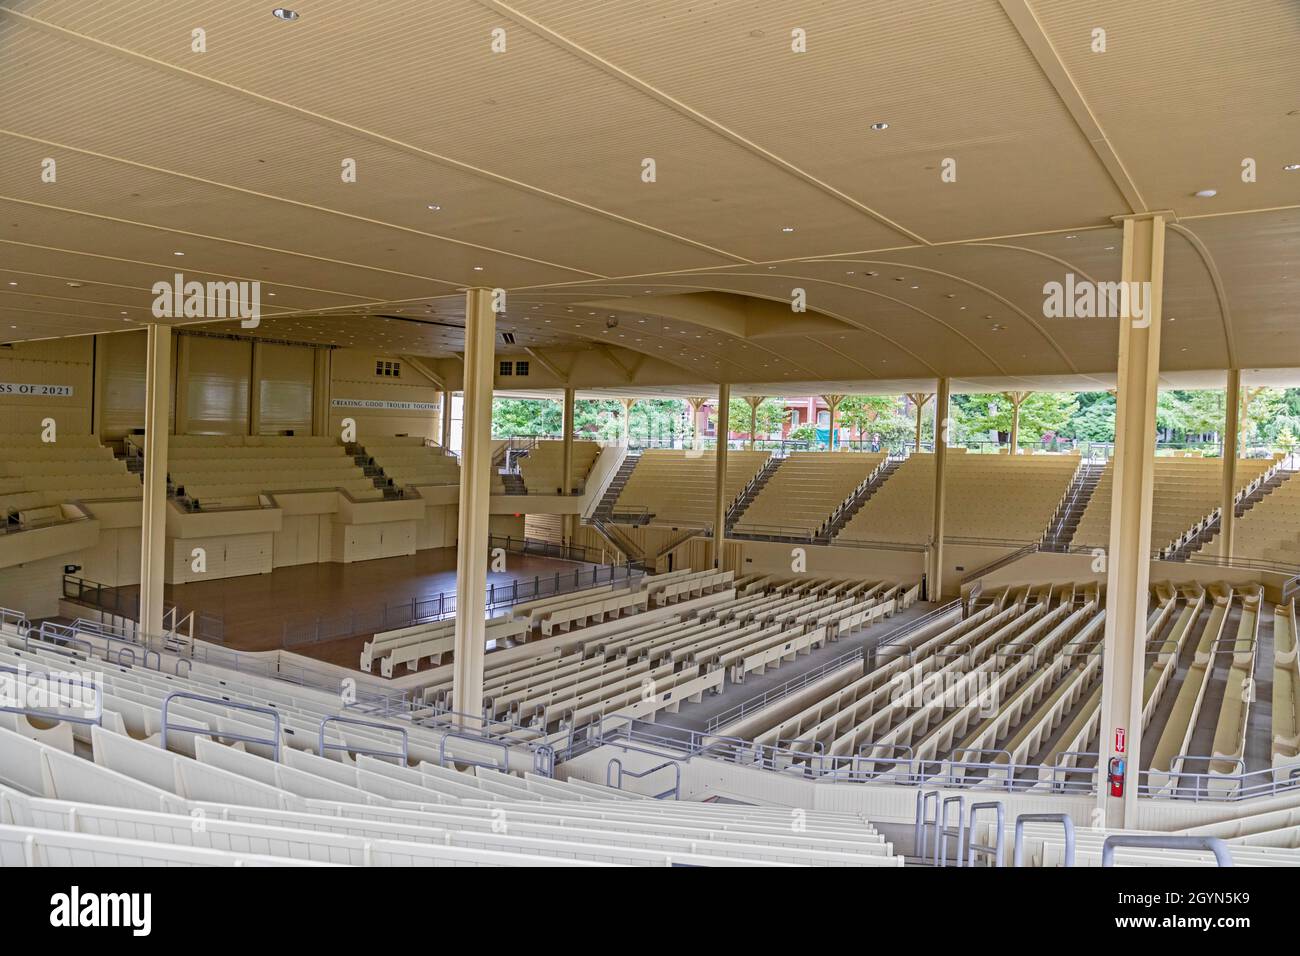 Chautauqua, New York - The 4,500-seat ampitheater at Chautauqua Institution replaced an old, historic structure in 2017. Stock Photo